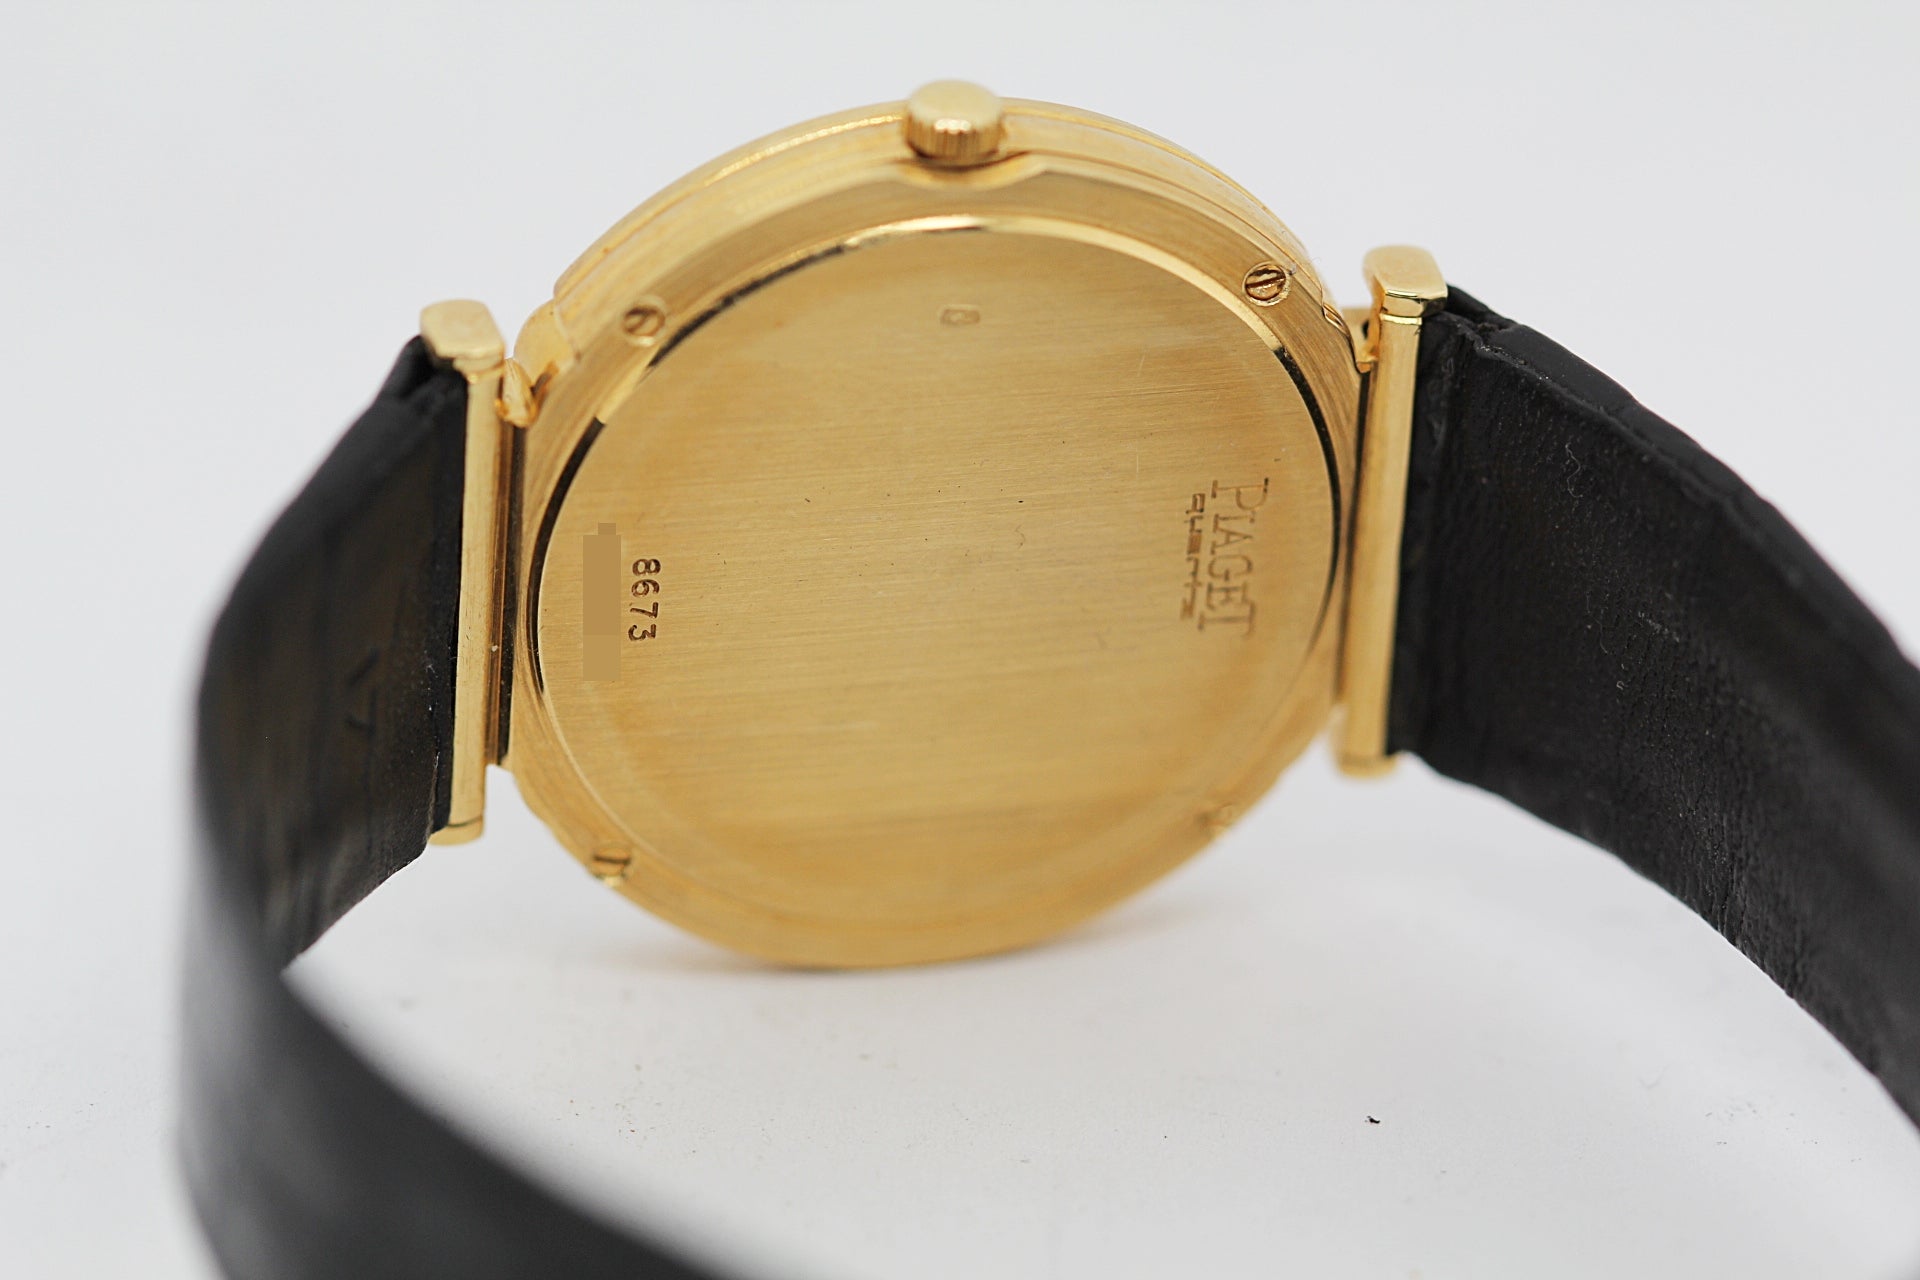 PIAGET<br>Polo Ref.8673